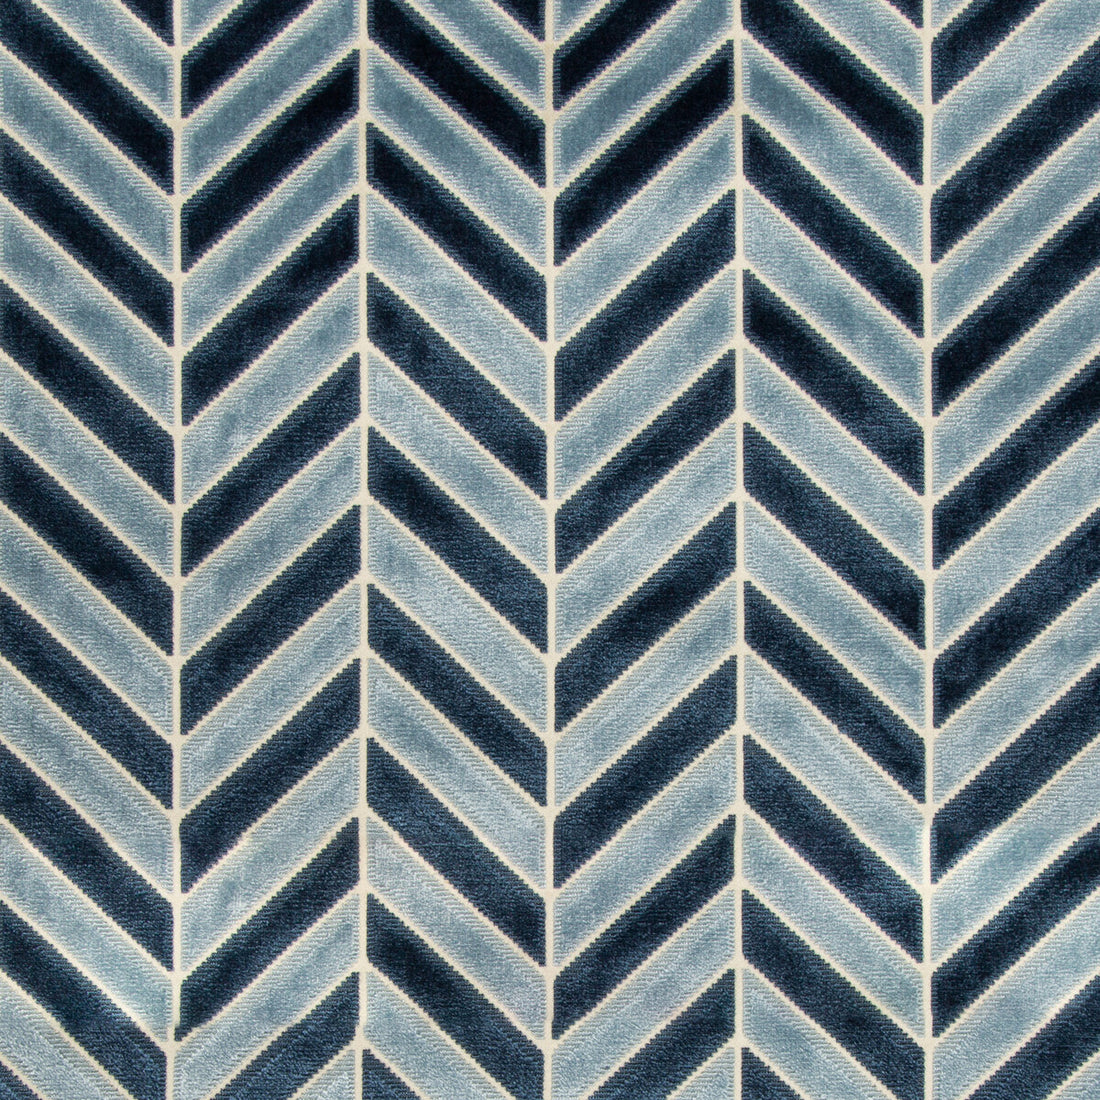 Pinnacle Velvet fabric in navy color - pattern 34779.5.0 - by Kravet Couture in the Artisan Velvets collection